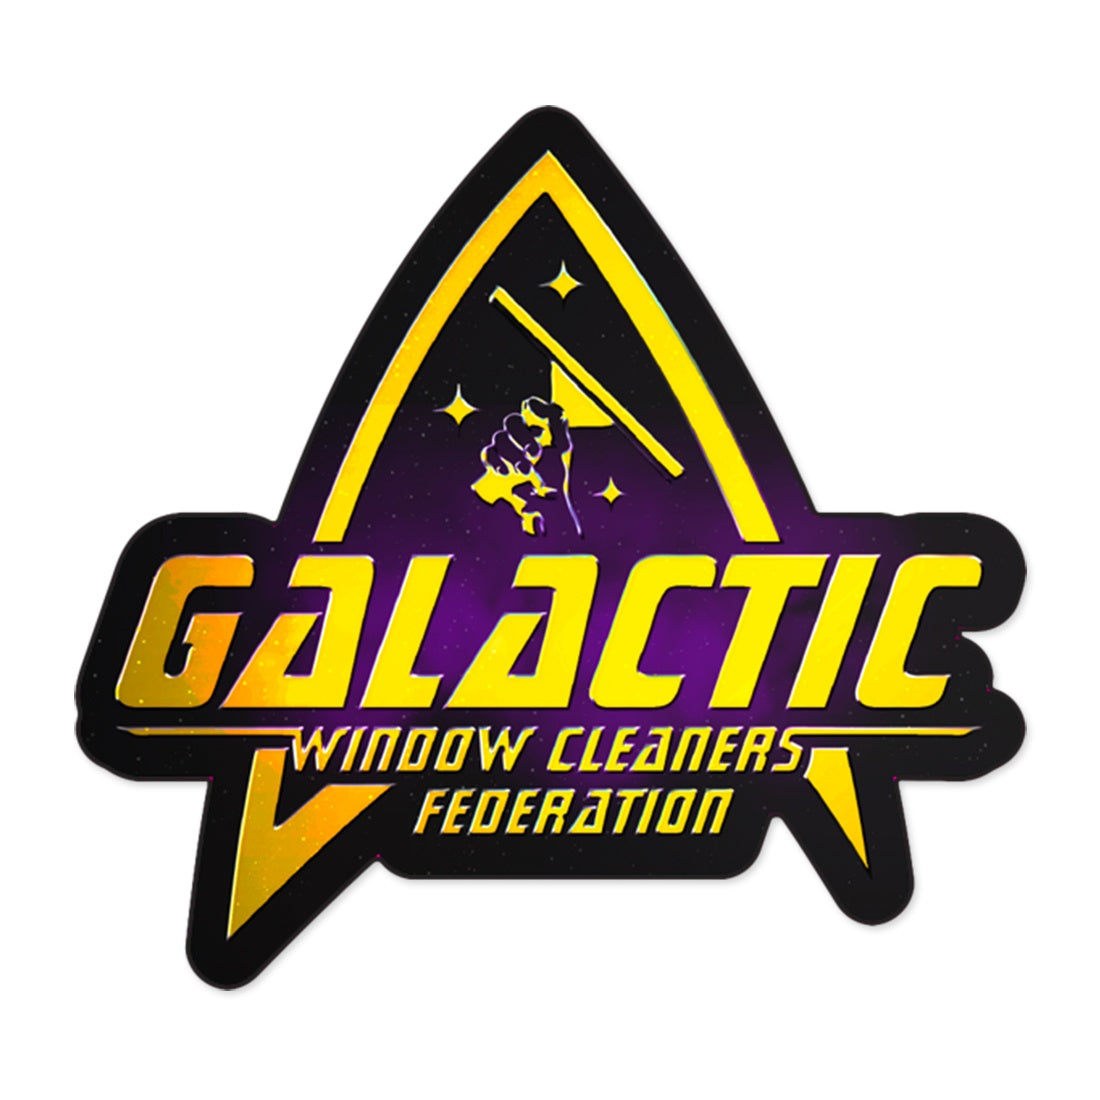 Galactic Window Cleaners Federation Membership Badge Sticker - Front View